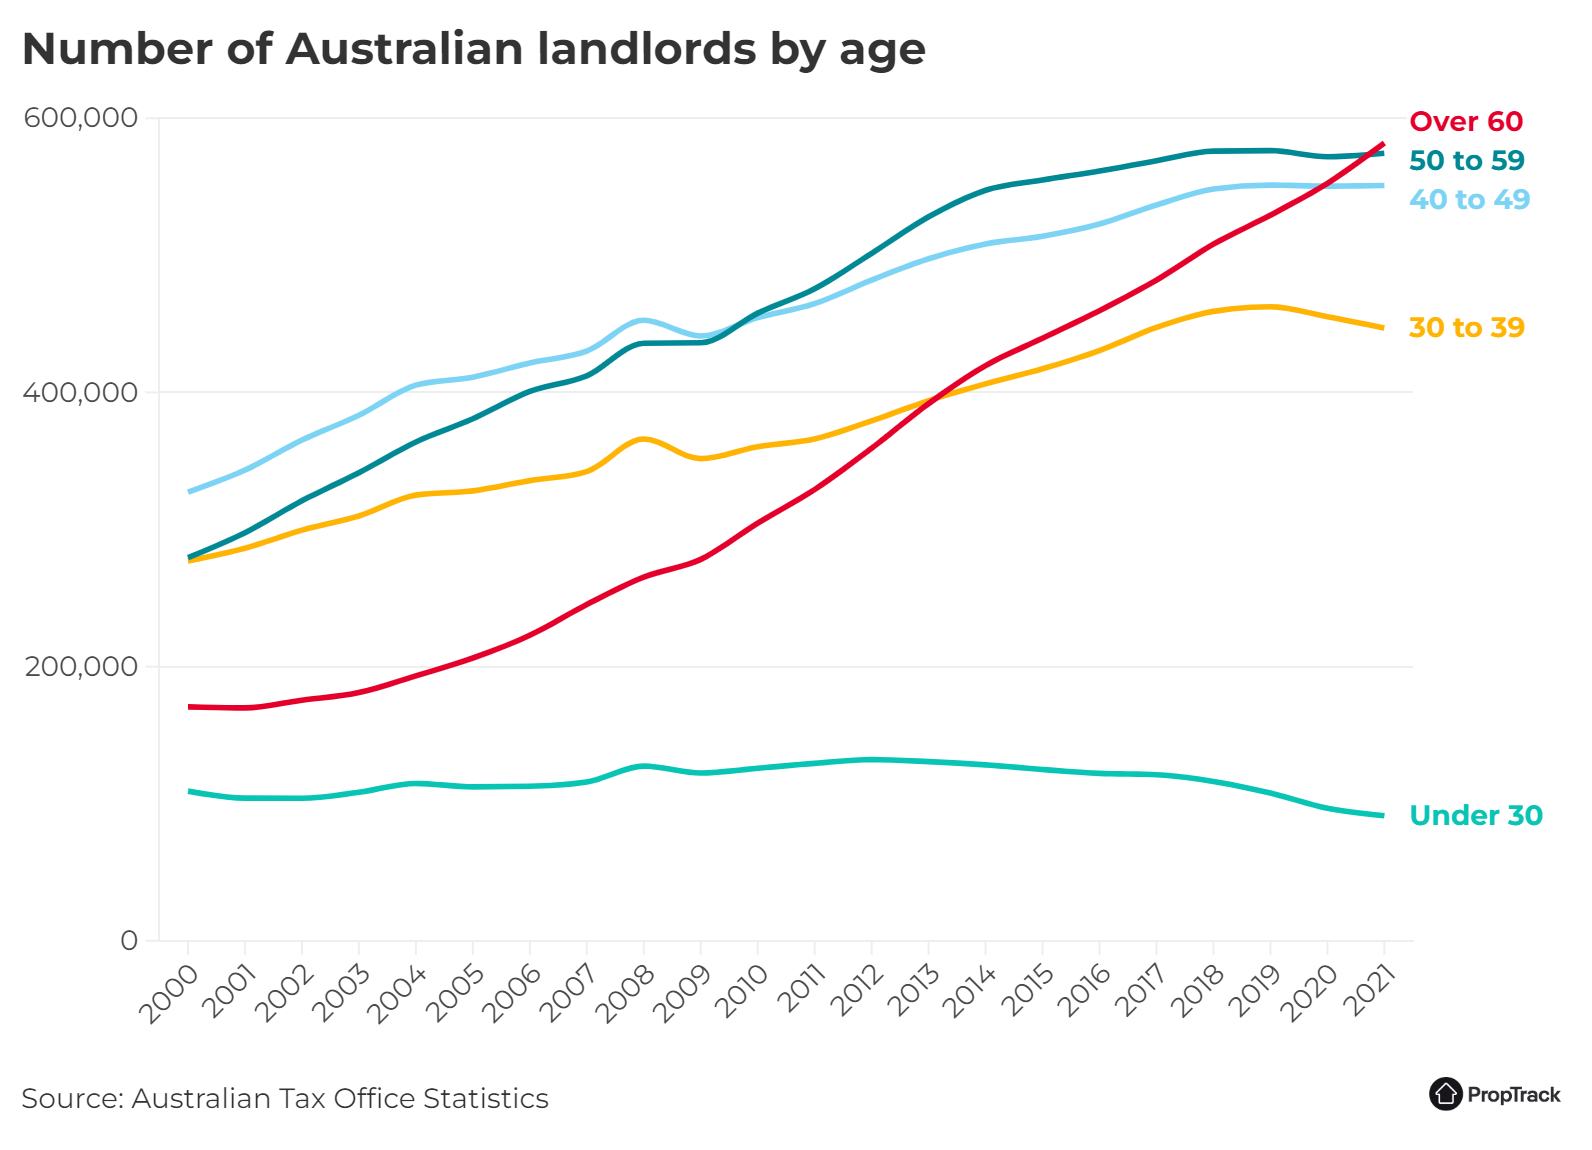 Chart showing the number of Australian landlords by age. There are more landlords aged over 60 than any other age group.